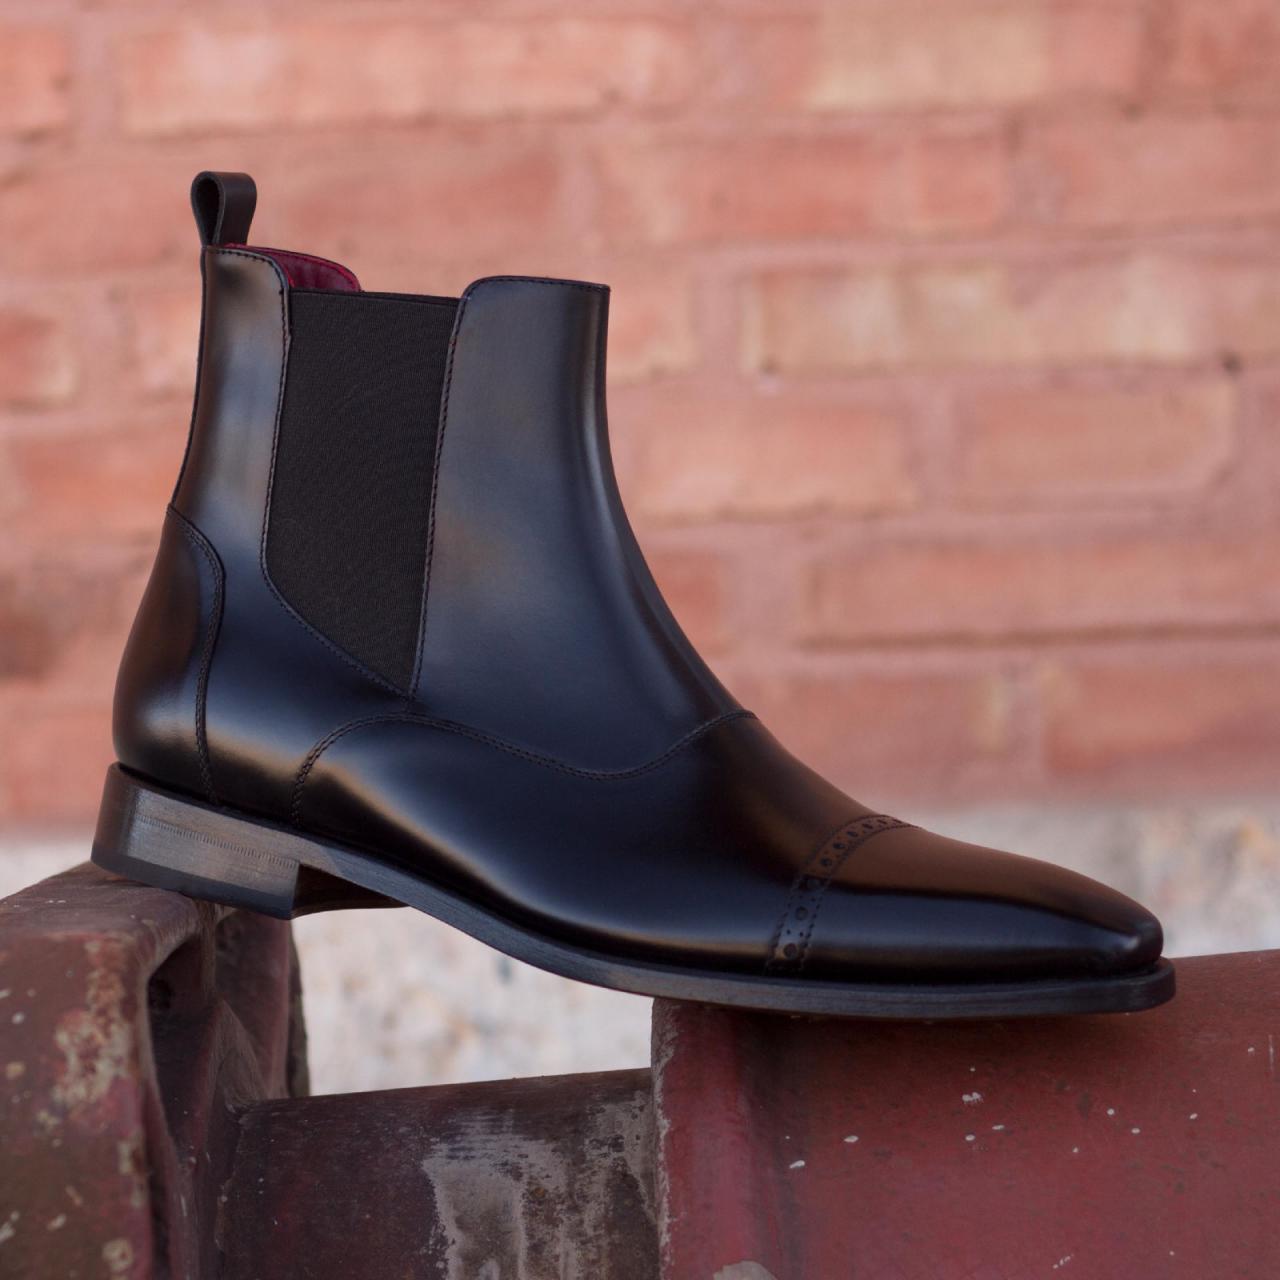 leather black chelsea boots mens